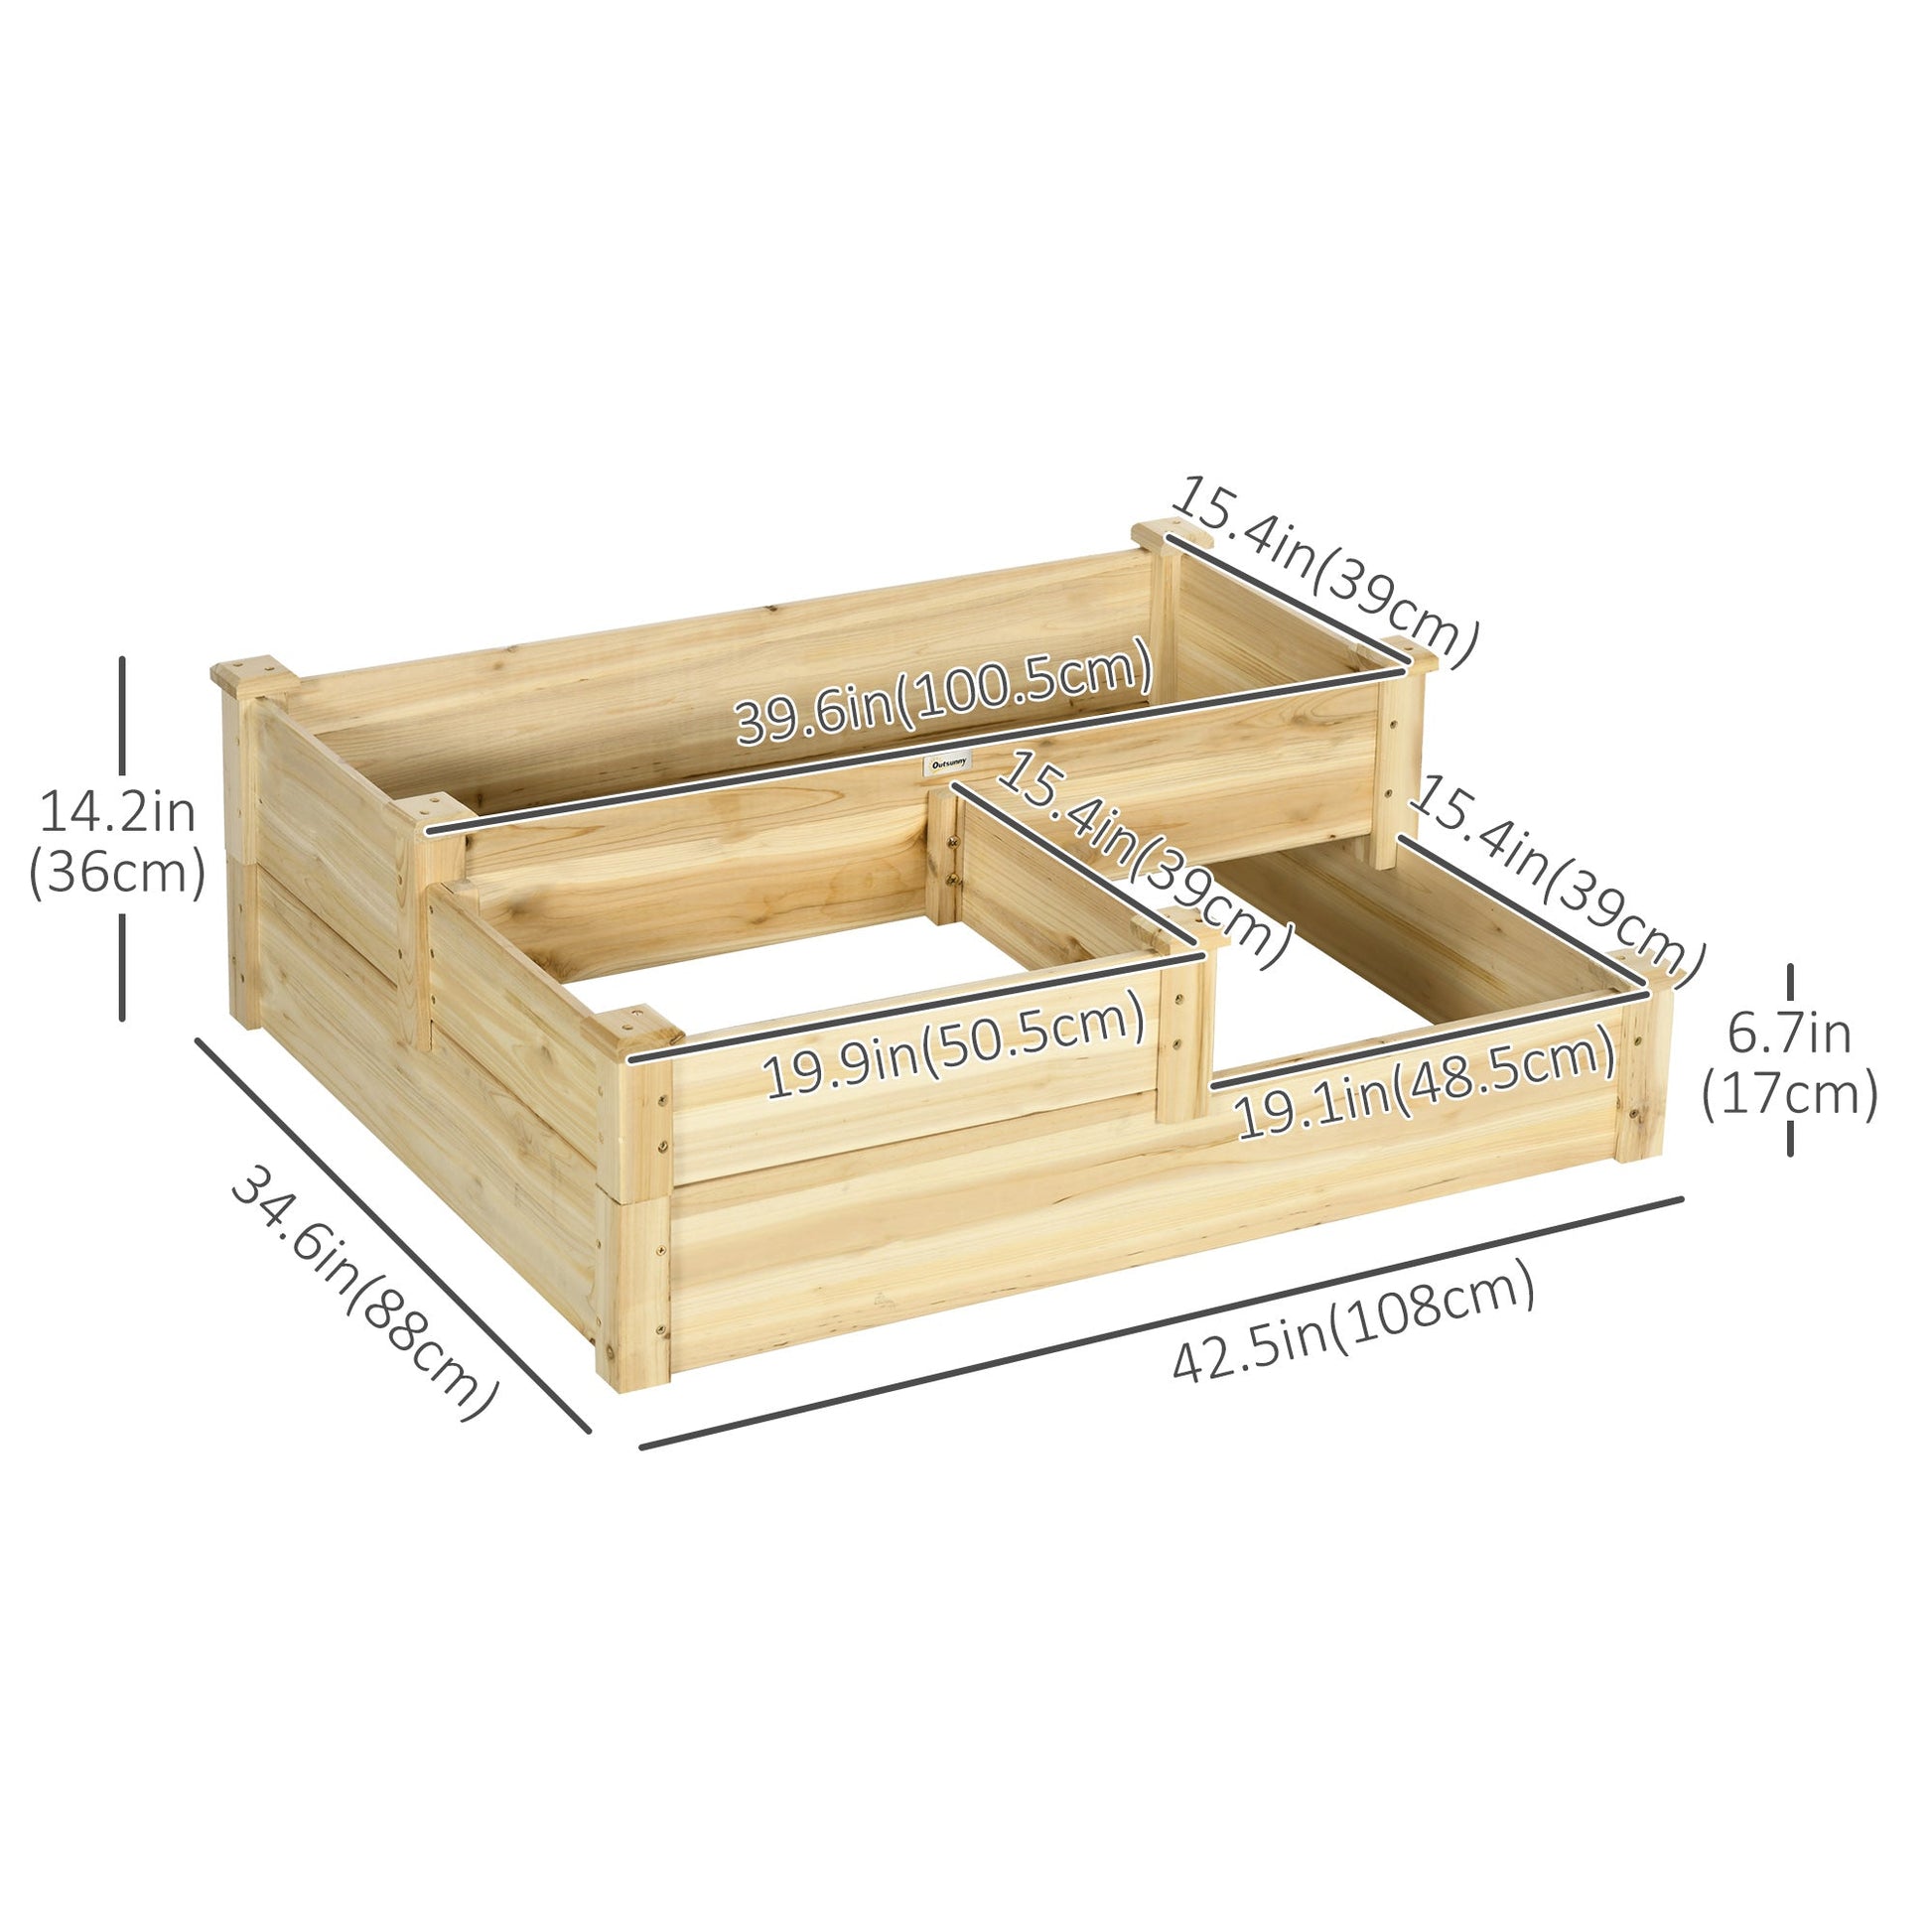 3 Tier Raised Garden Bed, Wooden Raised Planter Box Kit for Growing Vegetables, Herbs, Flowers, 42.5"x 34.6" x14.2", Natural at Gallery Canada